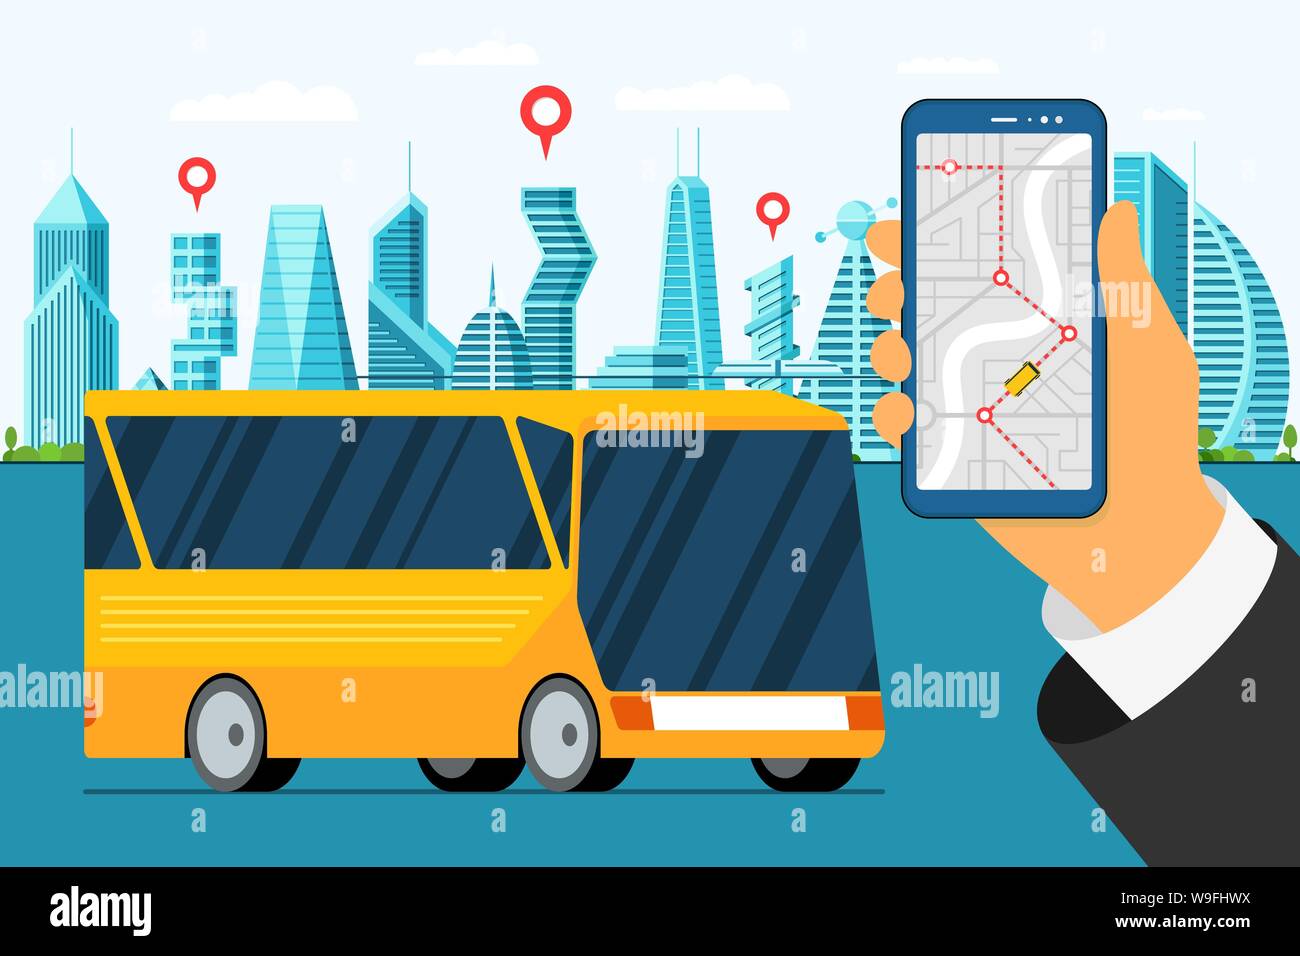 City bus tour banner design template. Urban vehicle with map application on smartphone screen. Puplic transport countryside traffic route. Vector travel app illustration Stock Vector